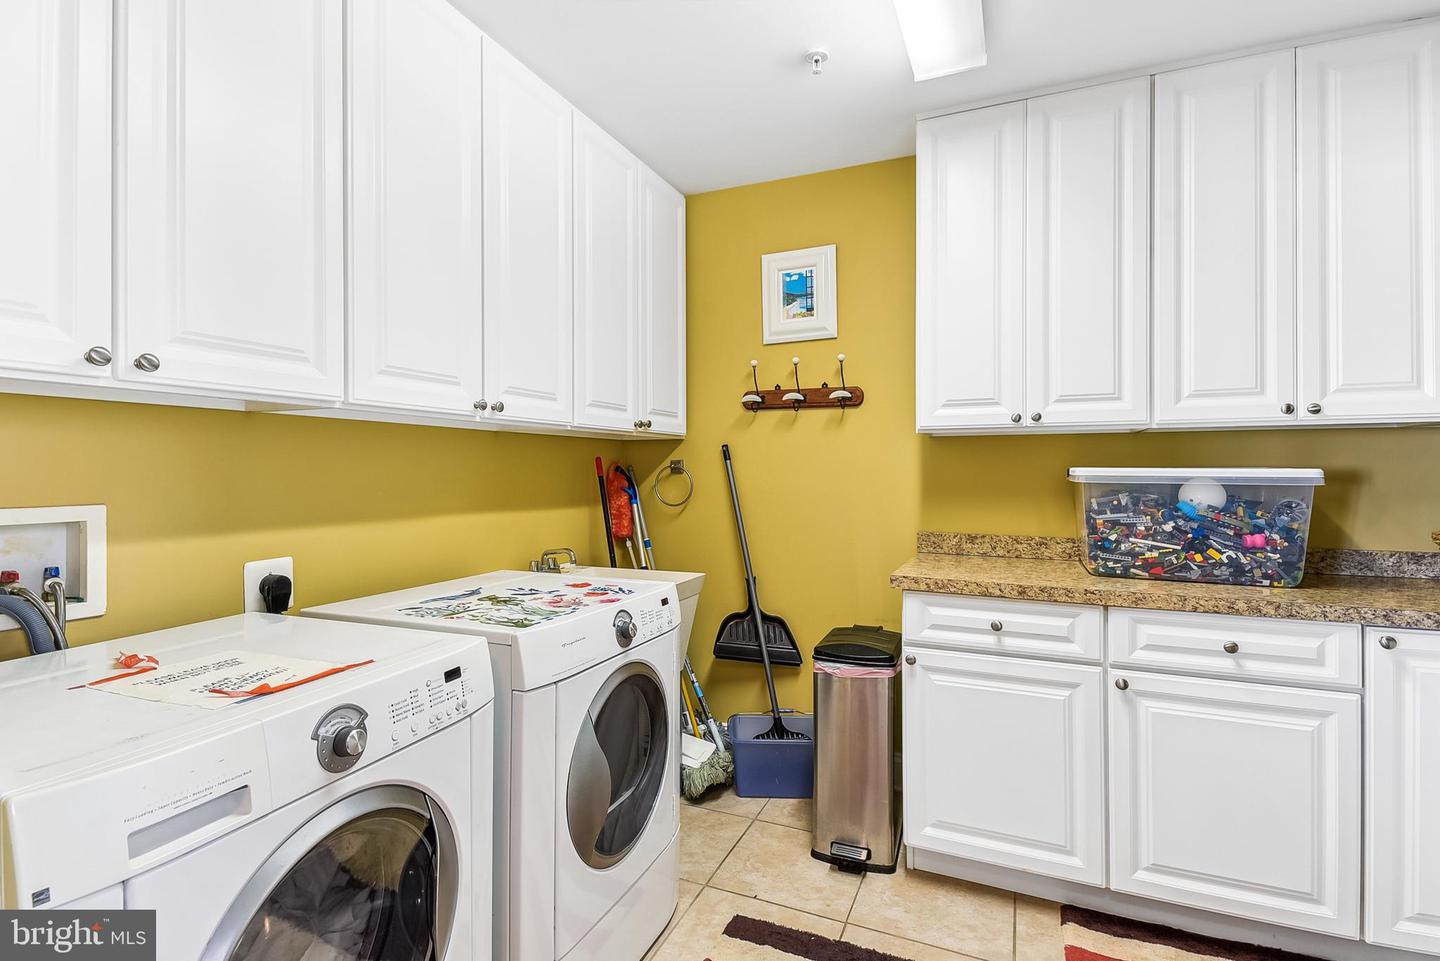 MDWO2019340-802917093186-2024-03-12-11-41-10 14301 Wight St #201 | Ocean City, MD Real Estate For Sale | MLS# Mdwo2019340  - 1st Choice Properties